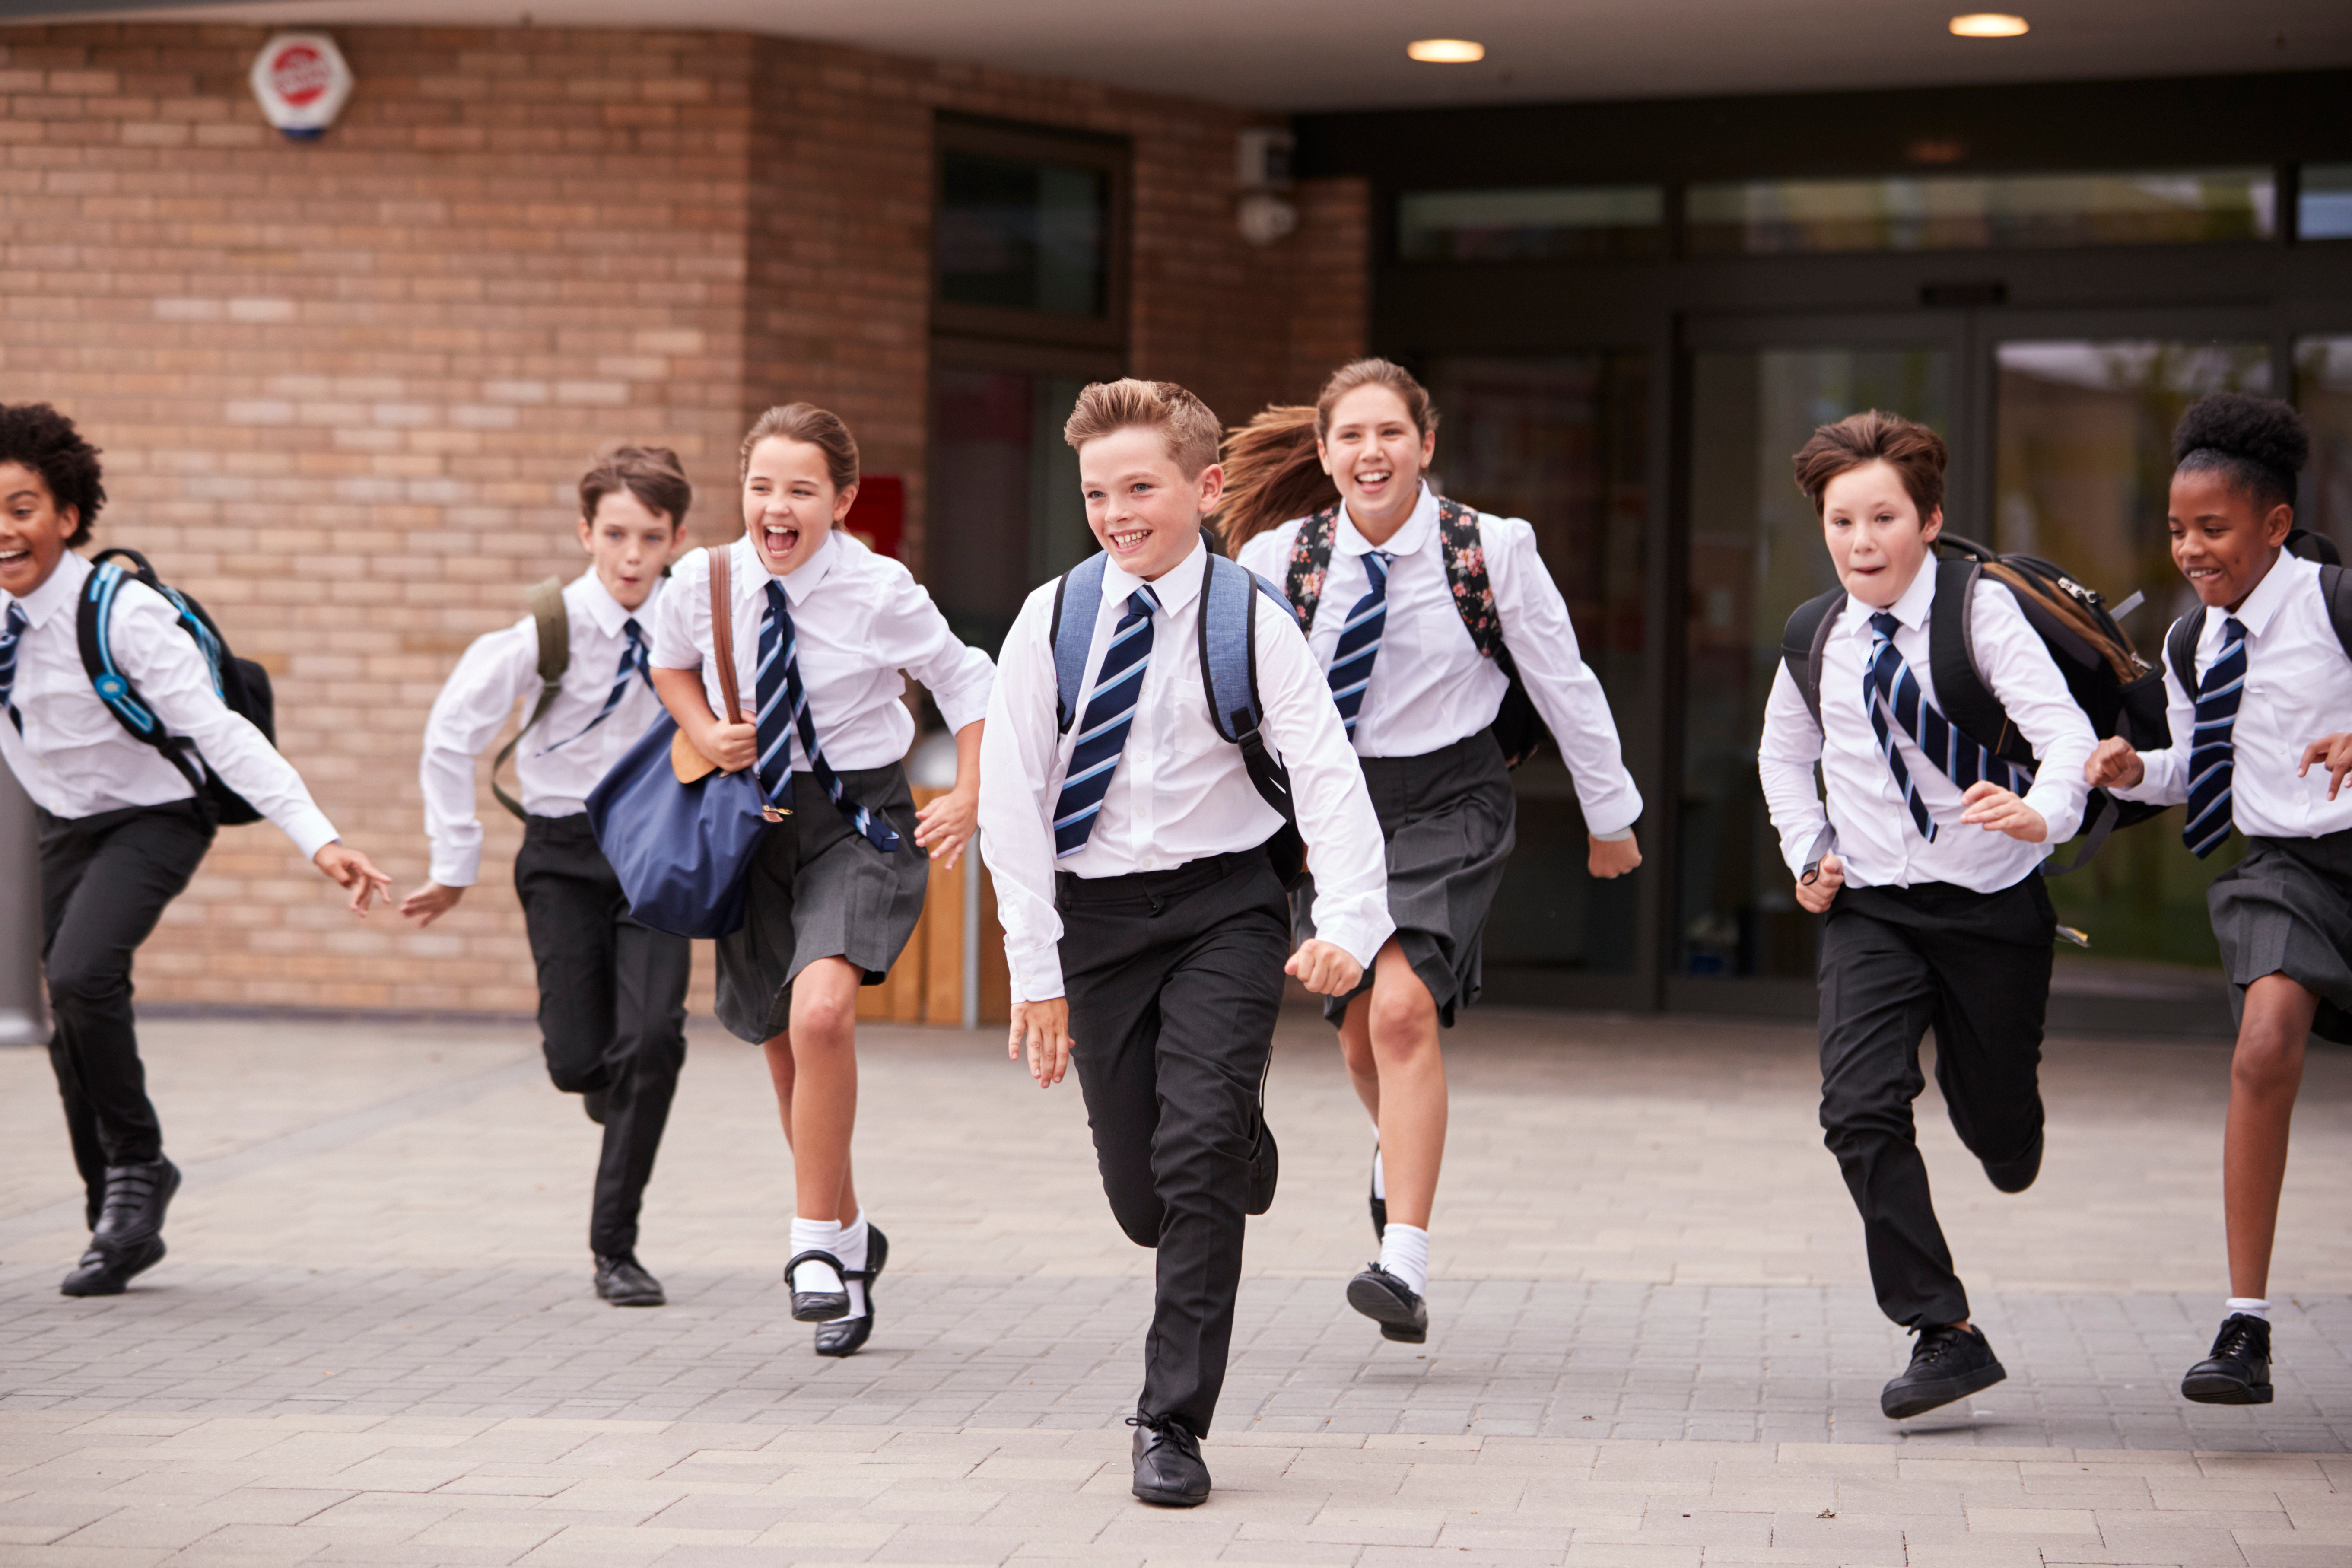 A group of students in their school uniform. | Source: Shutterstock